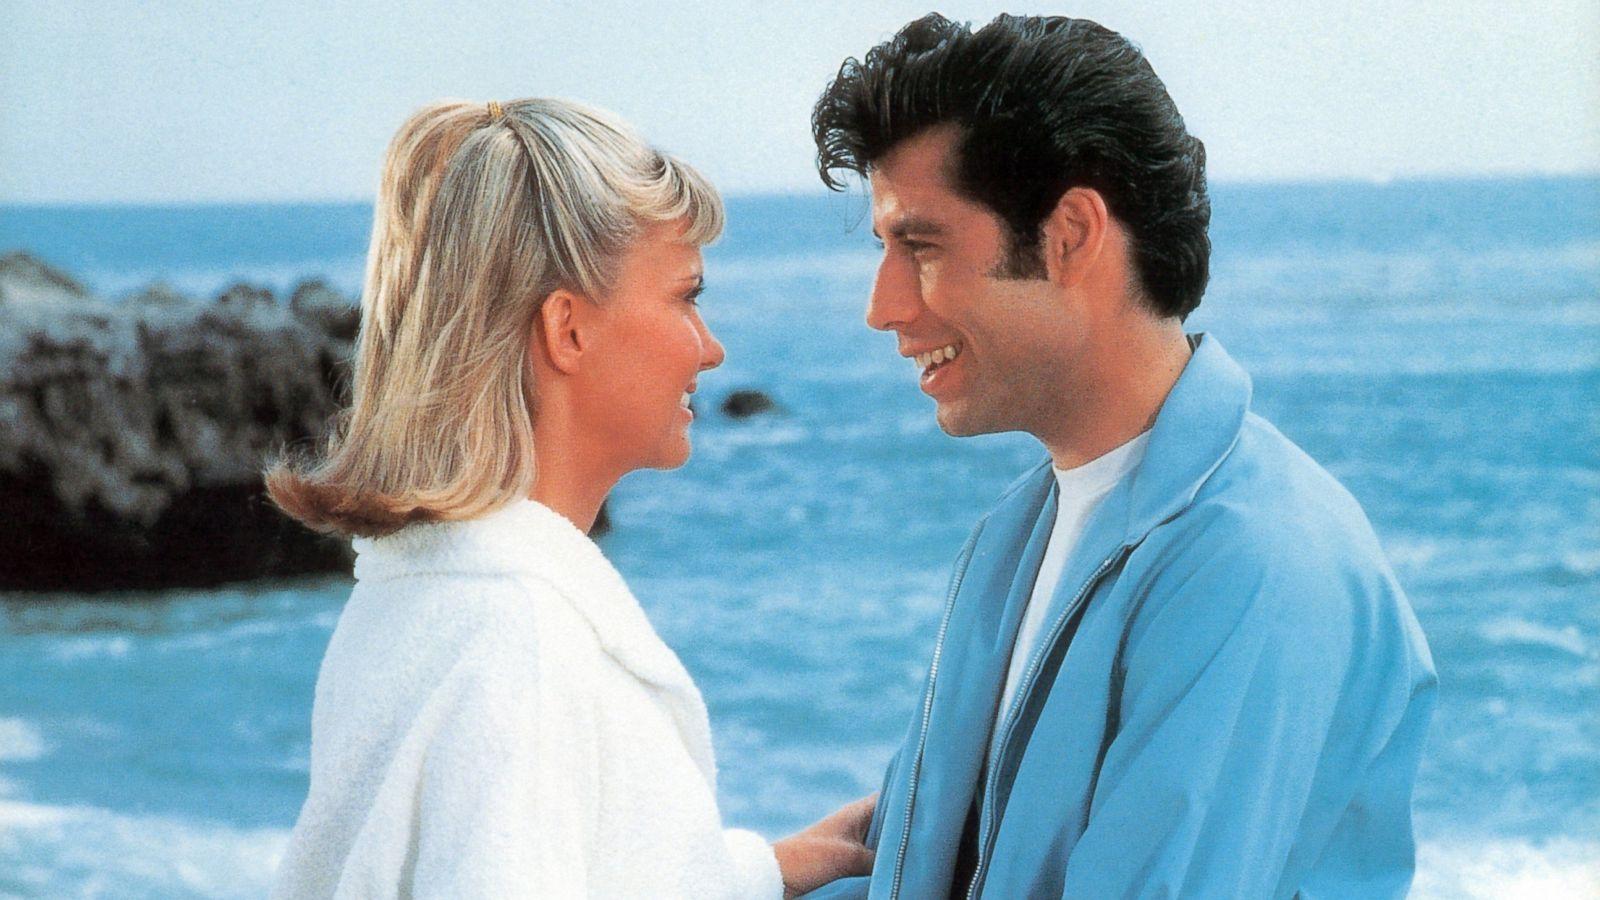 'Grease' Facts You May Not Have Known